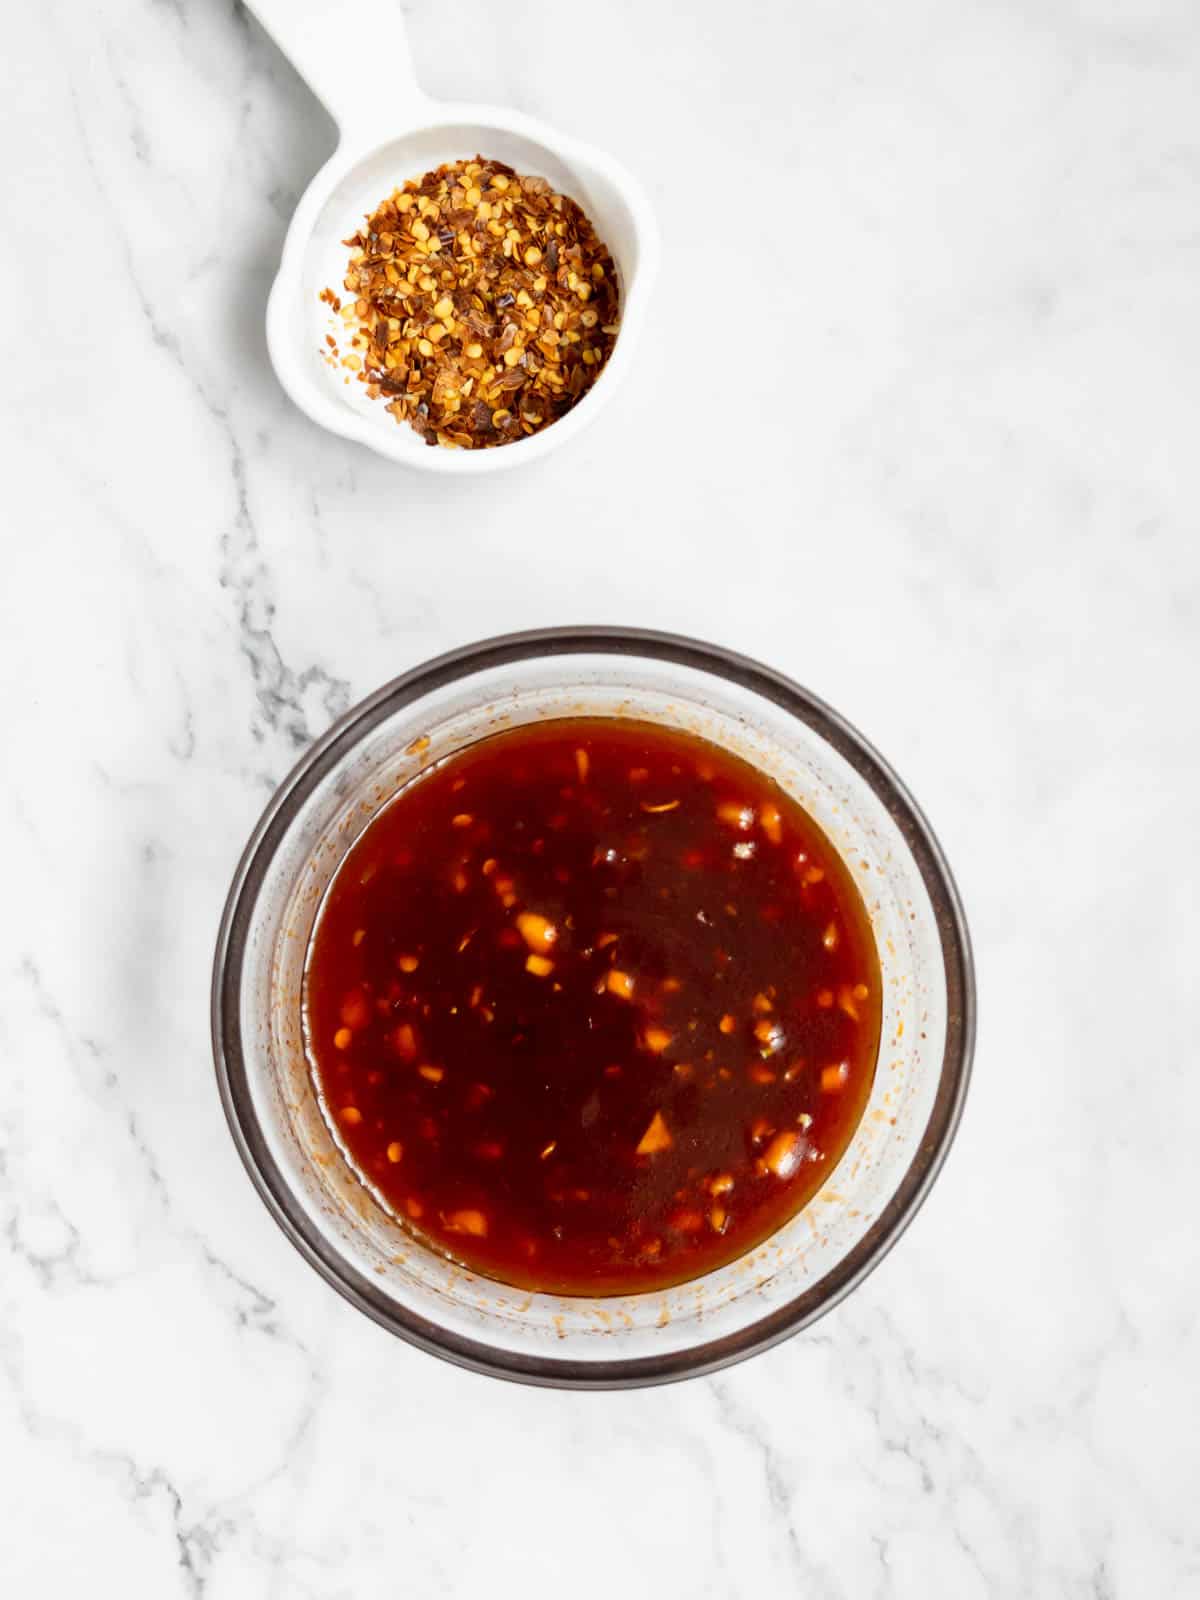 A homemade spicy sauce for rice cakes in a bowl. Next to it is a small bowl of chili flakes.